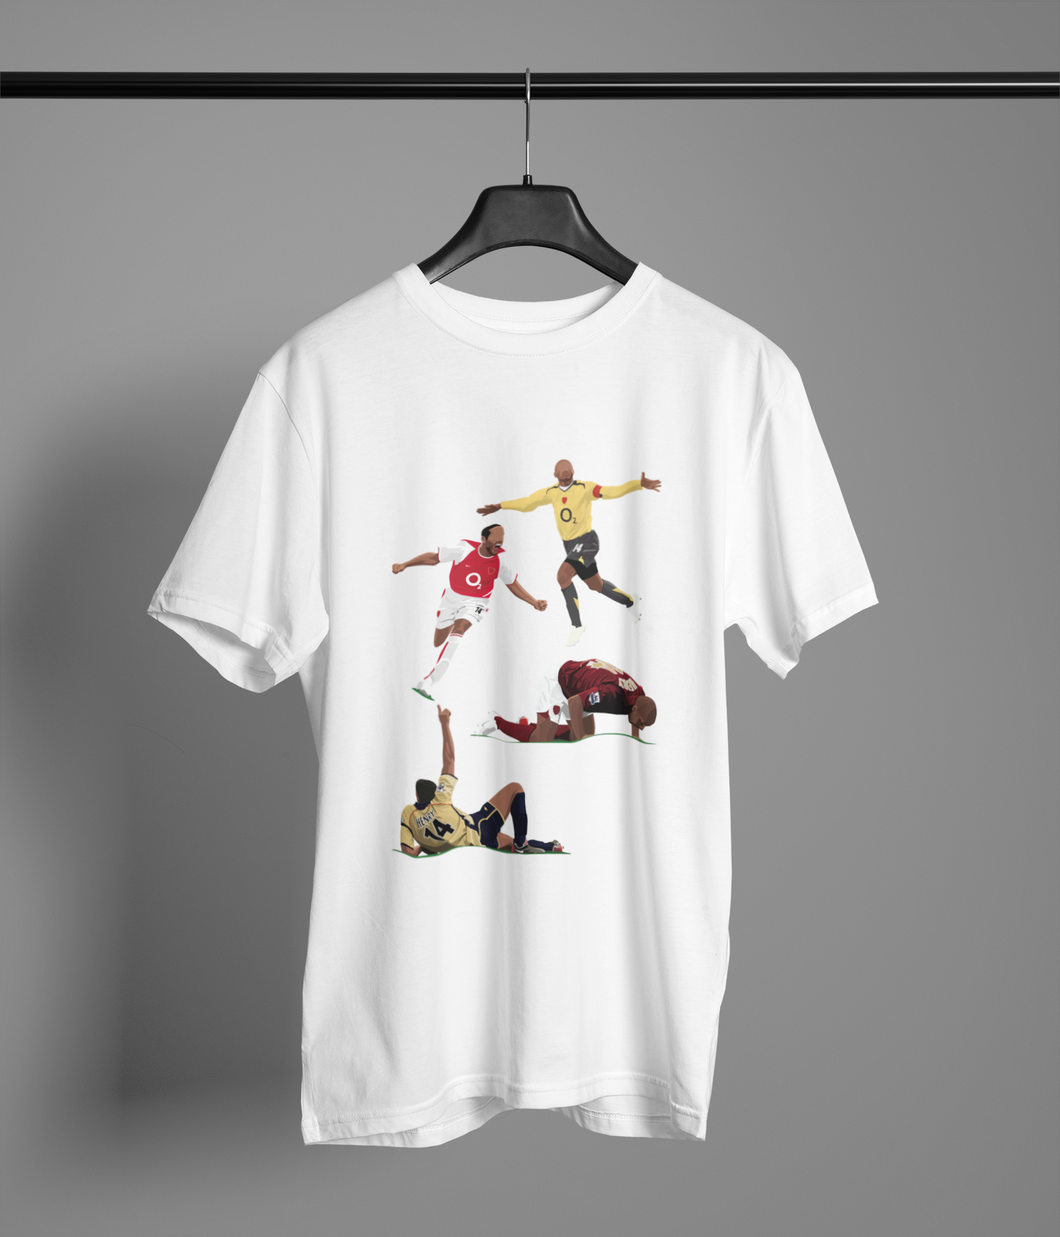 THE Thierry Henry Tee